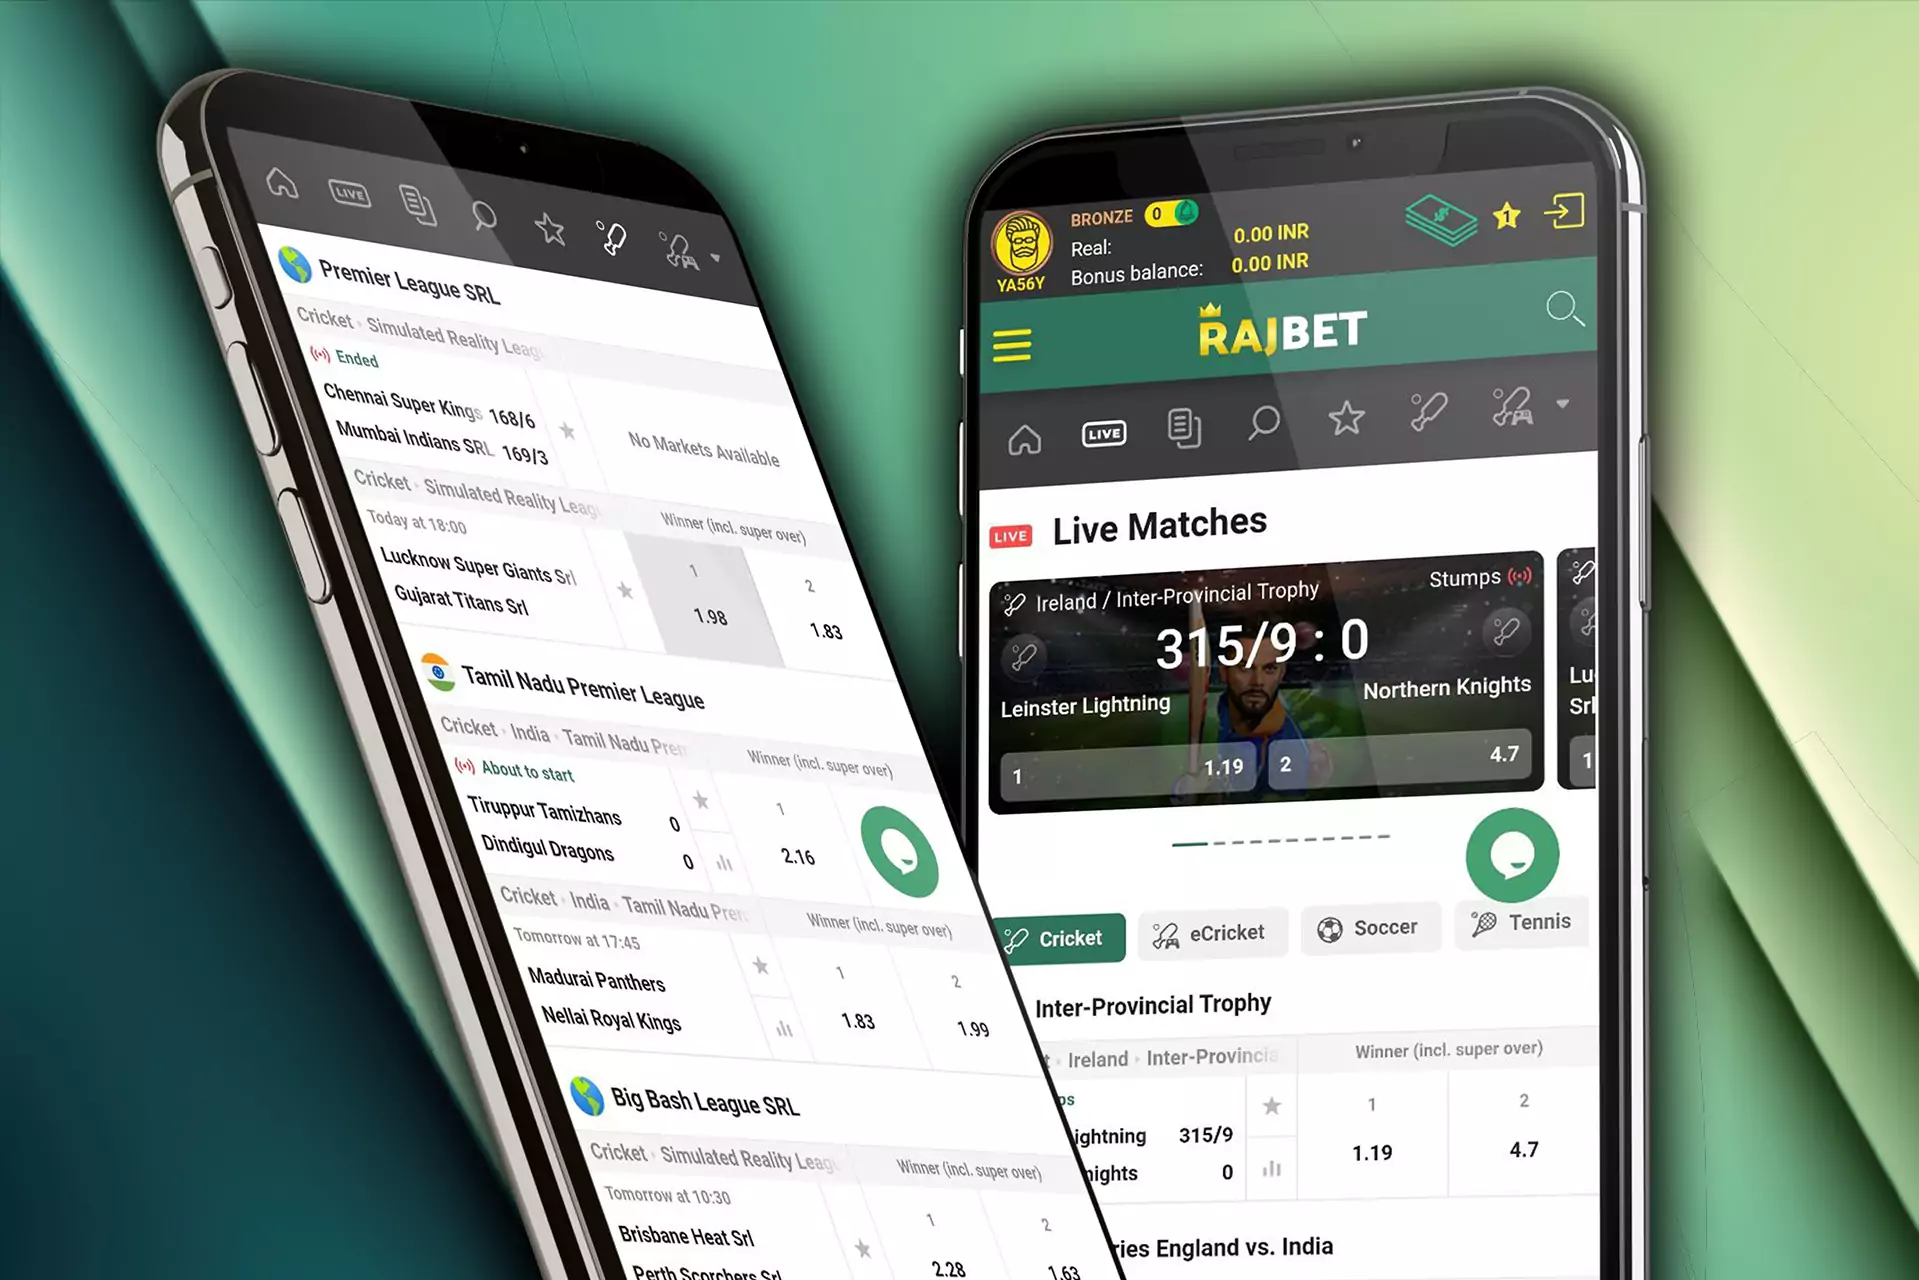 The Rajbet app allows you to bet on a variety of match outcomes.